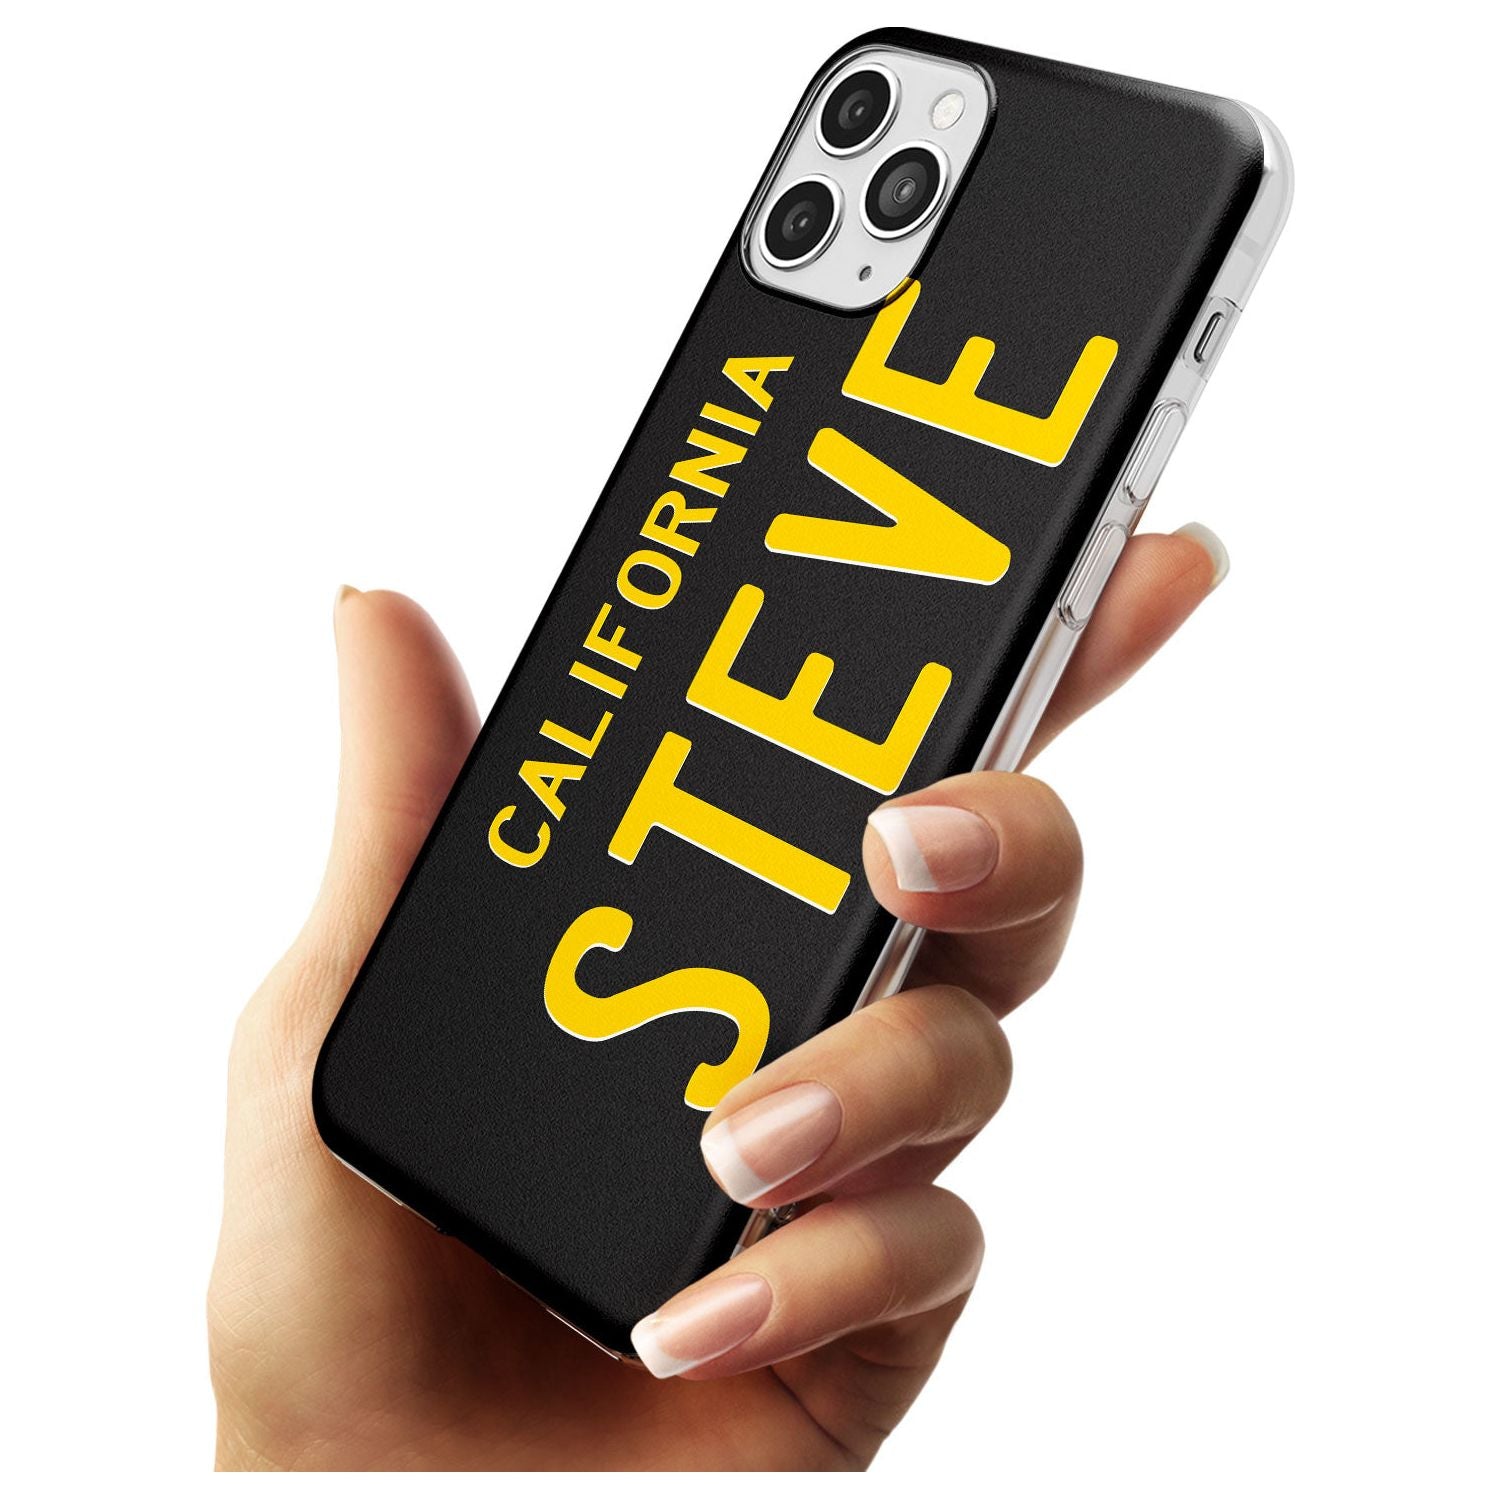 Vintage California License Plate Black Impact Phone Case for iPhone 11 Pro Max